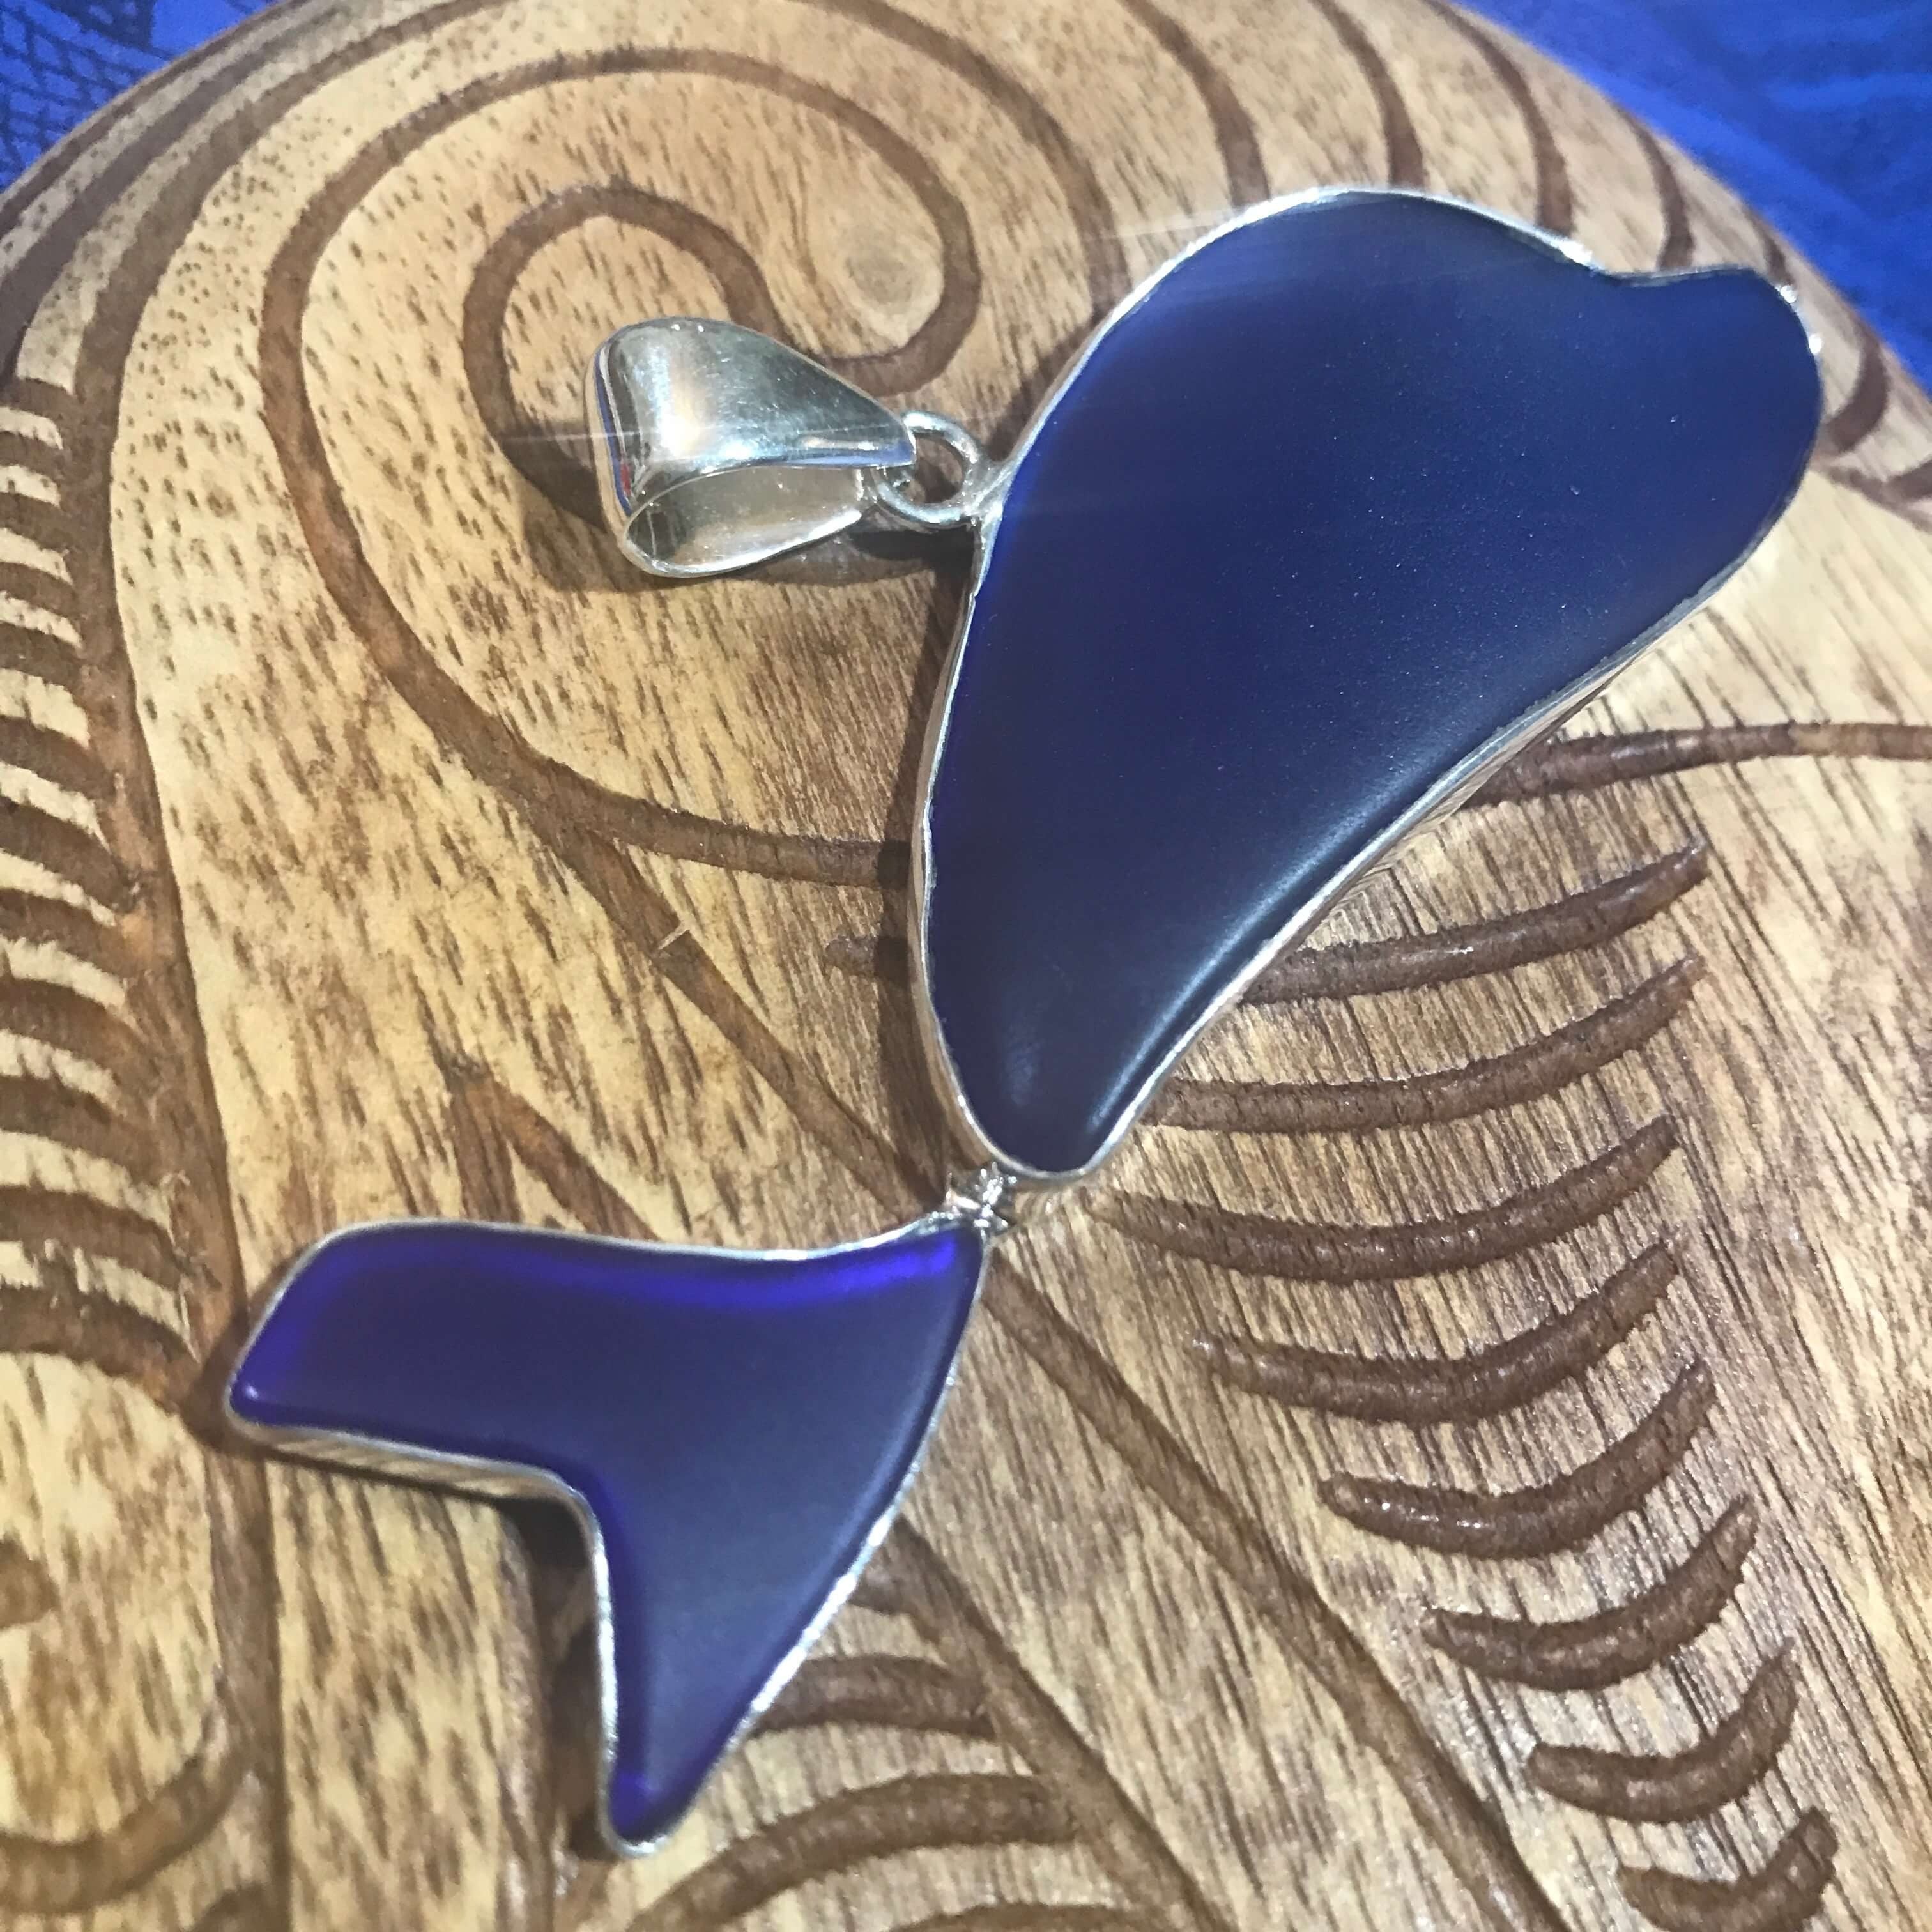 Island jewelry blue beach glass dolphin pendant set in stirling silver | Aloha Products USA